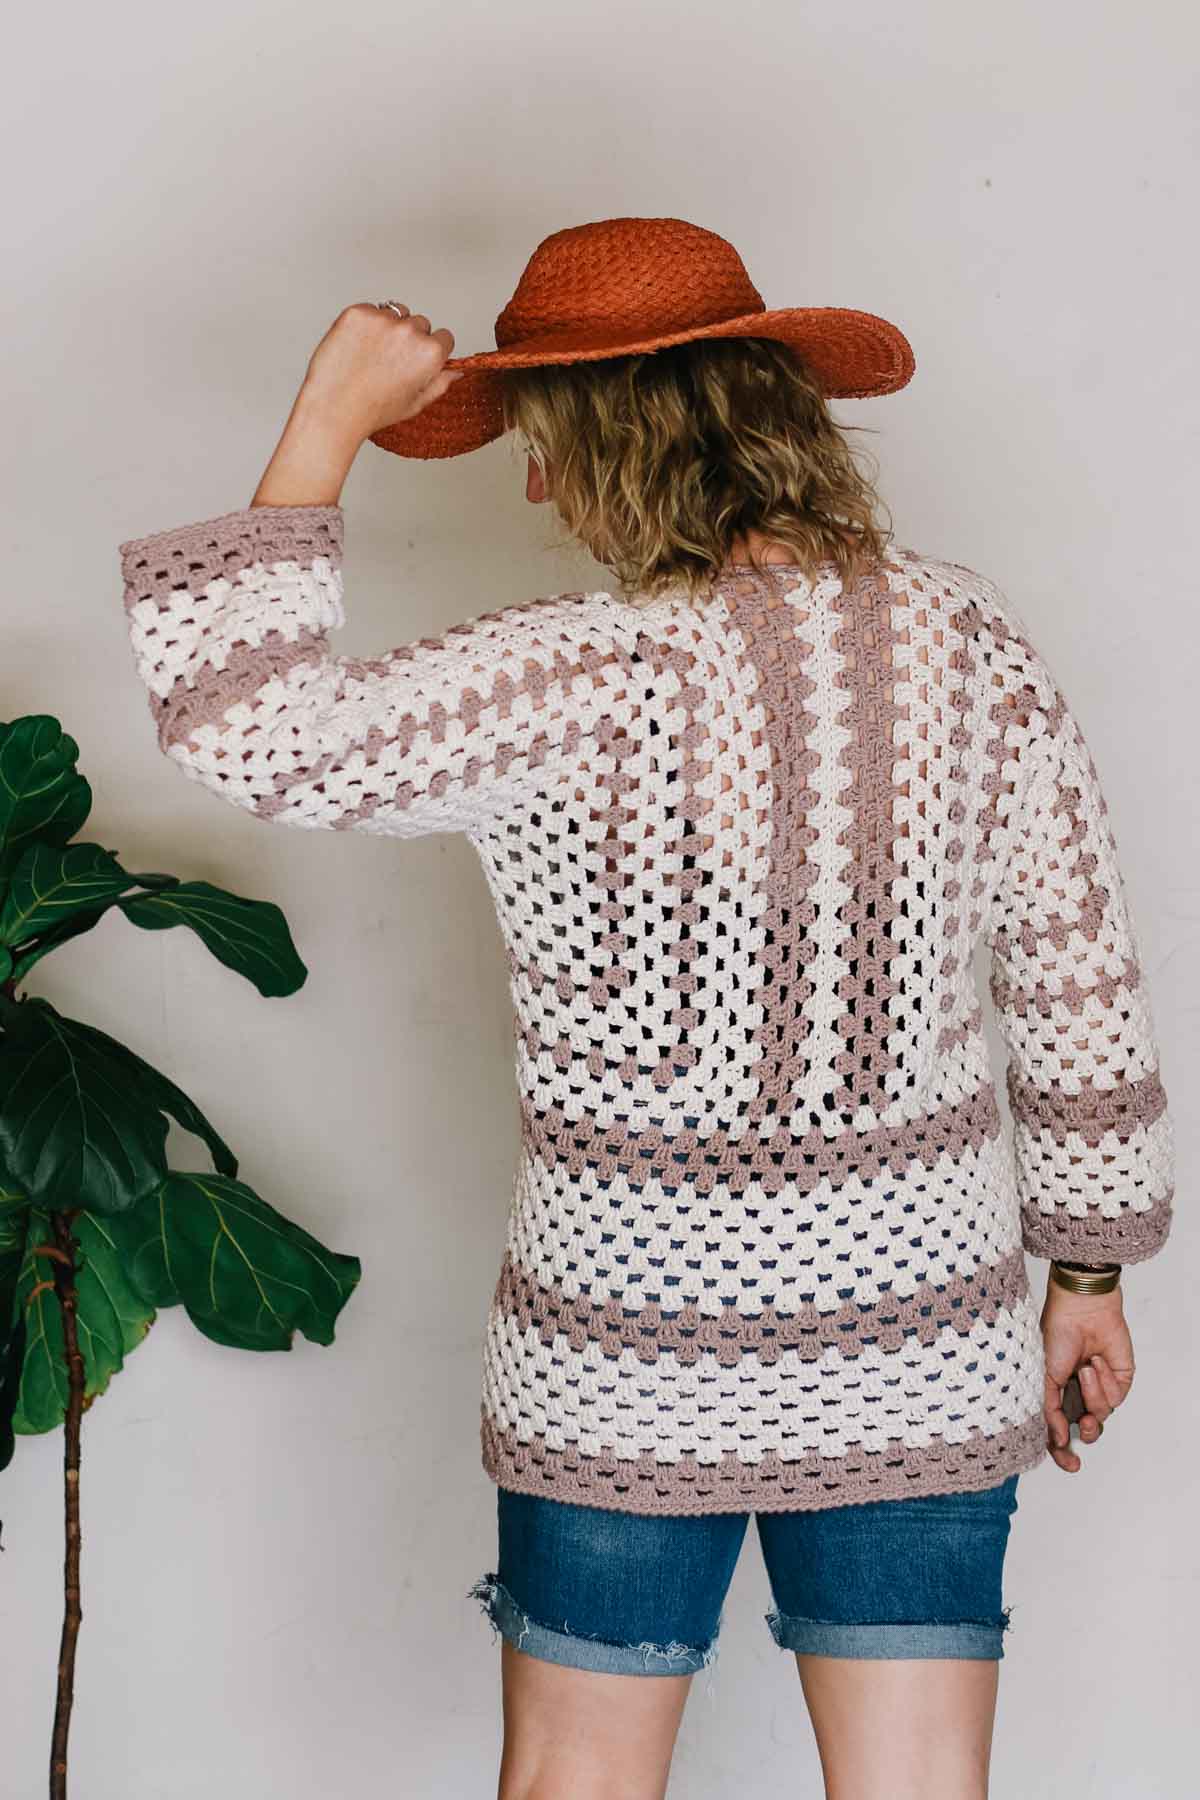 Back view of a crochet coverup made from granny stitch hexagons.